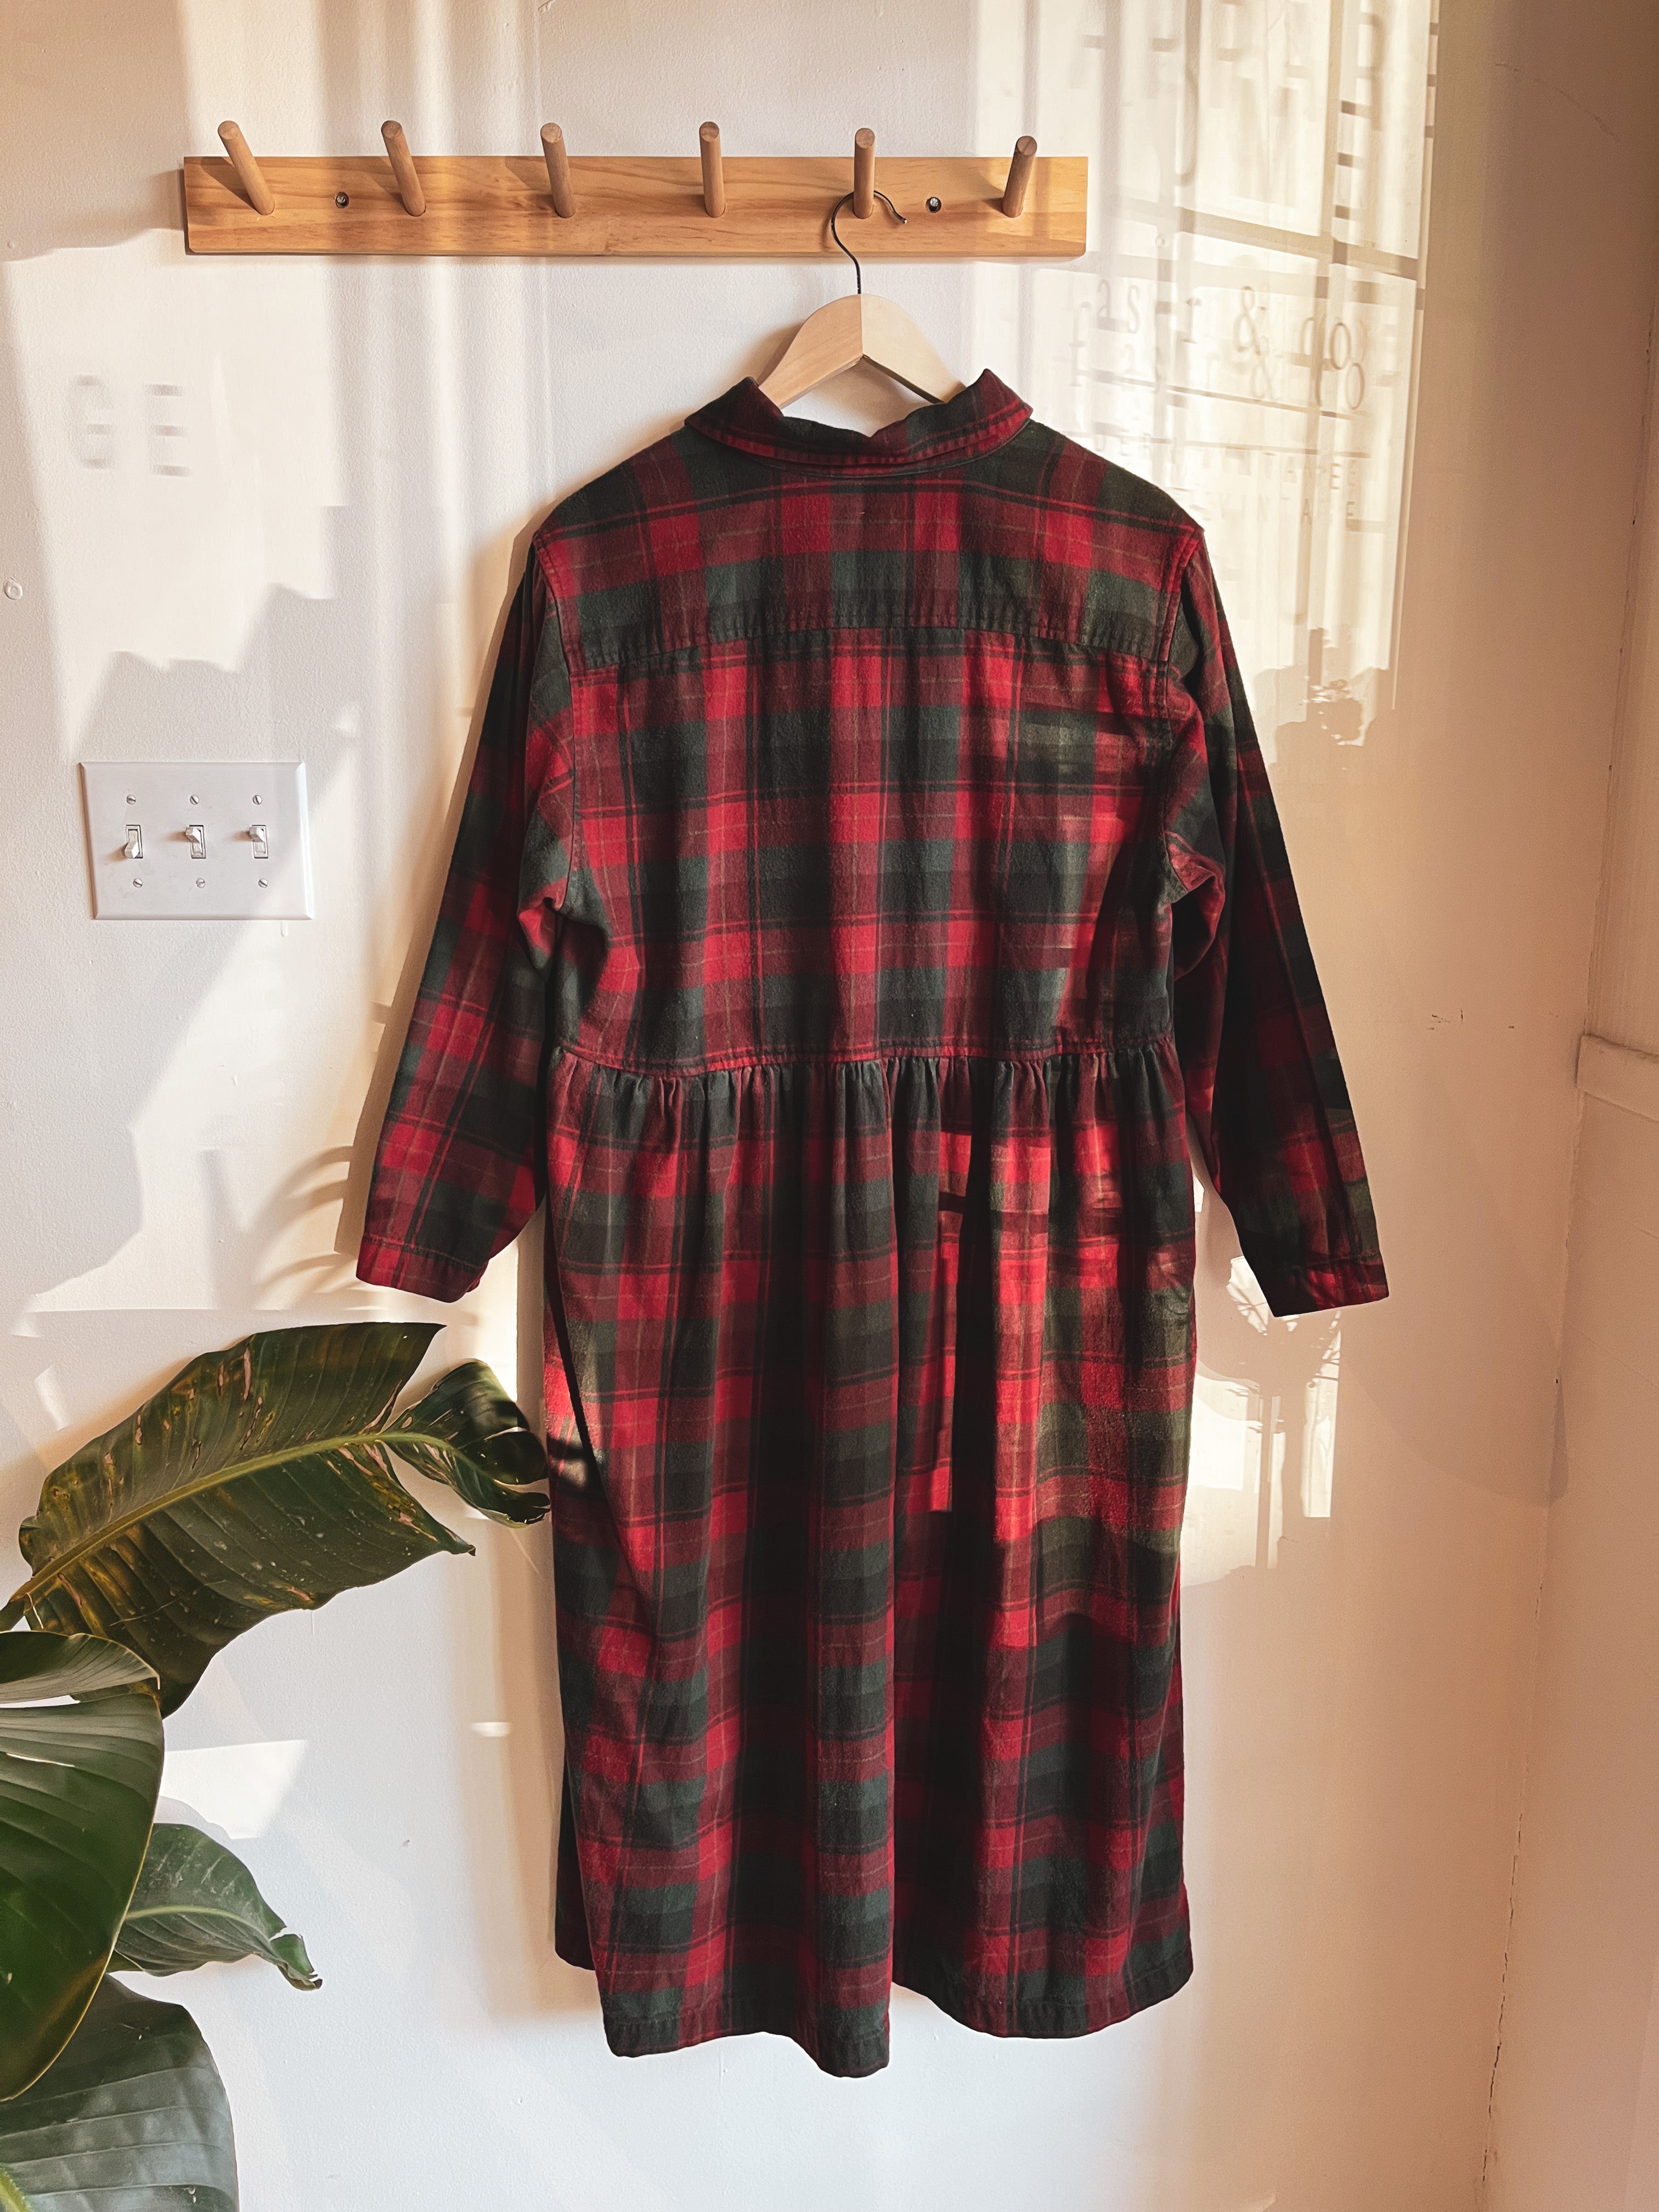 vintage red and green flannel dress or nightgown